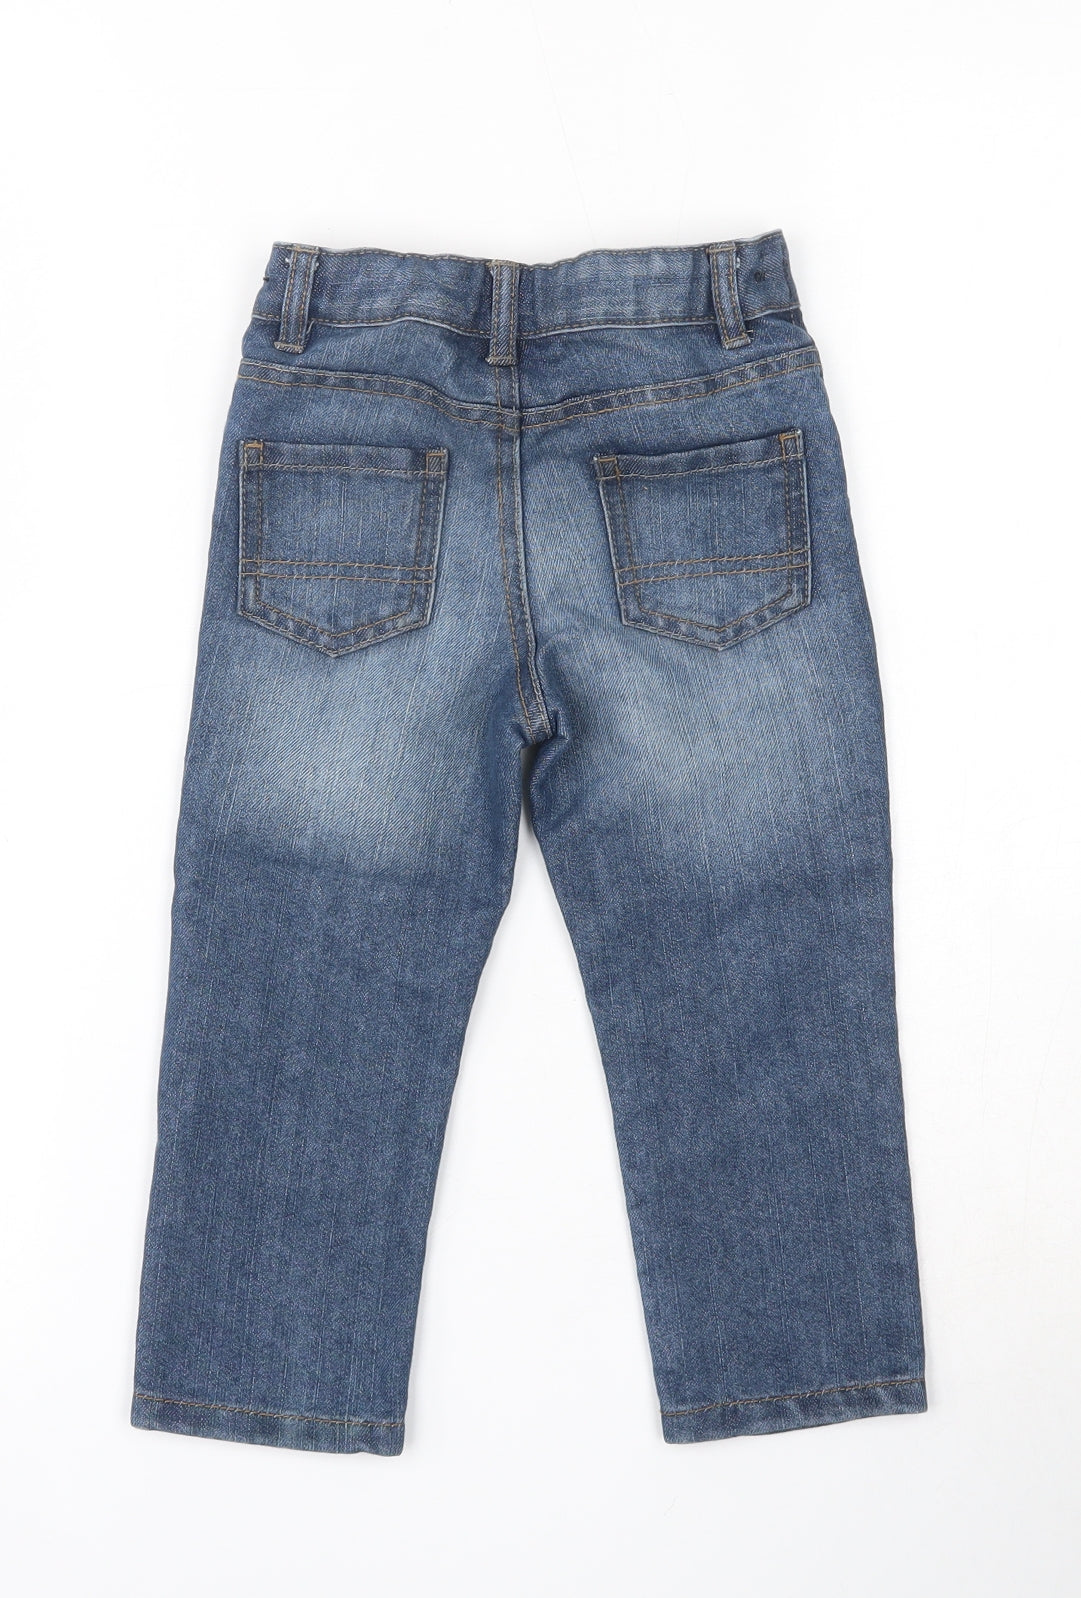 George Boys Blue  Cotton Straight Jeans Size 2-3 Years  Regular Button